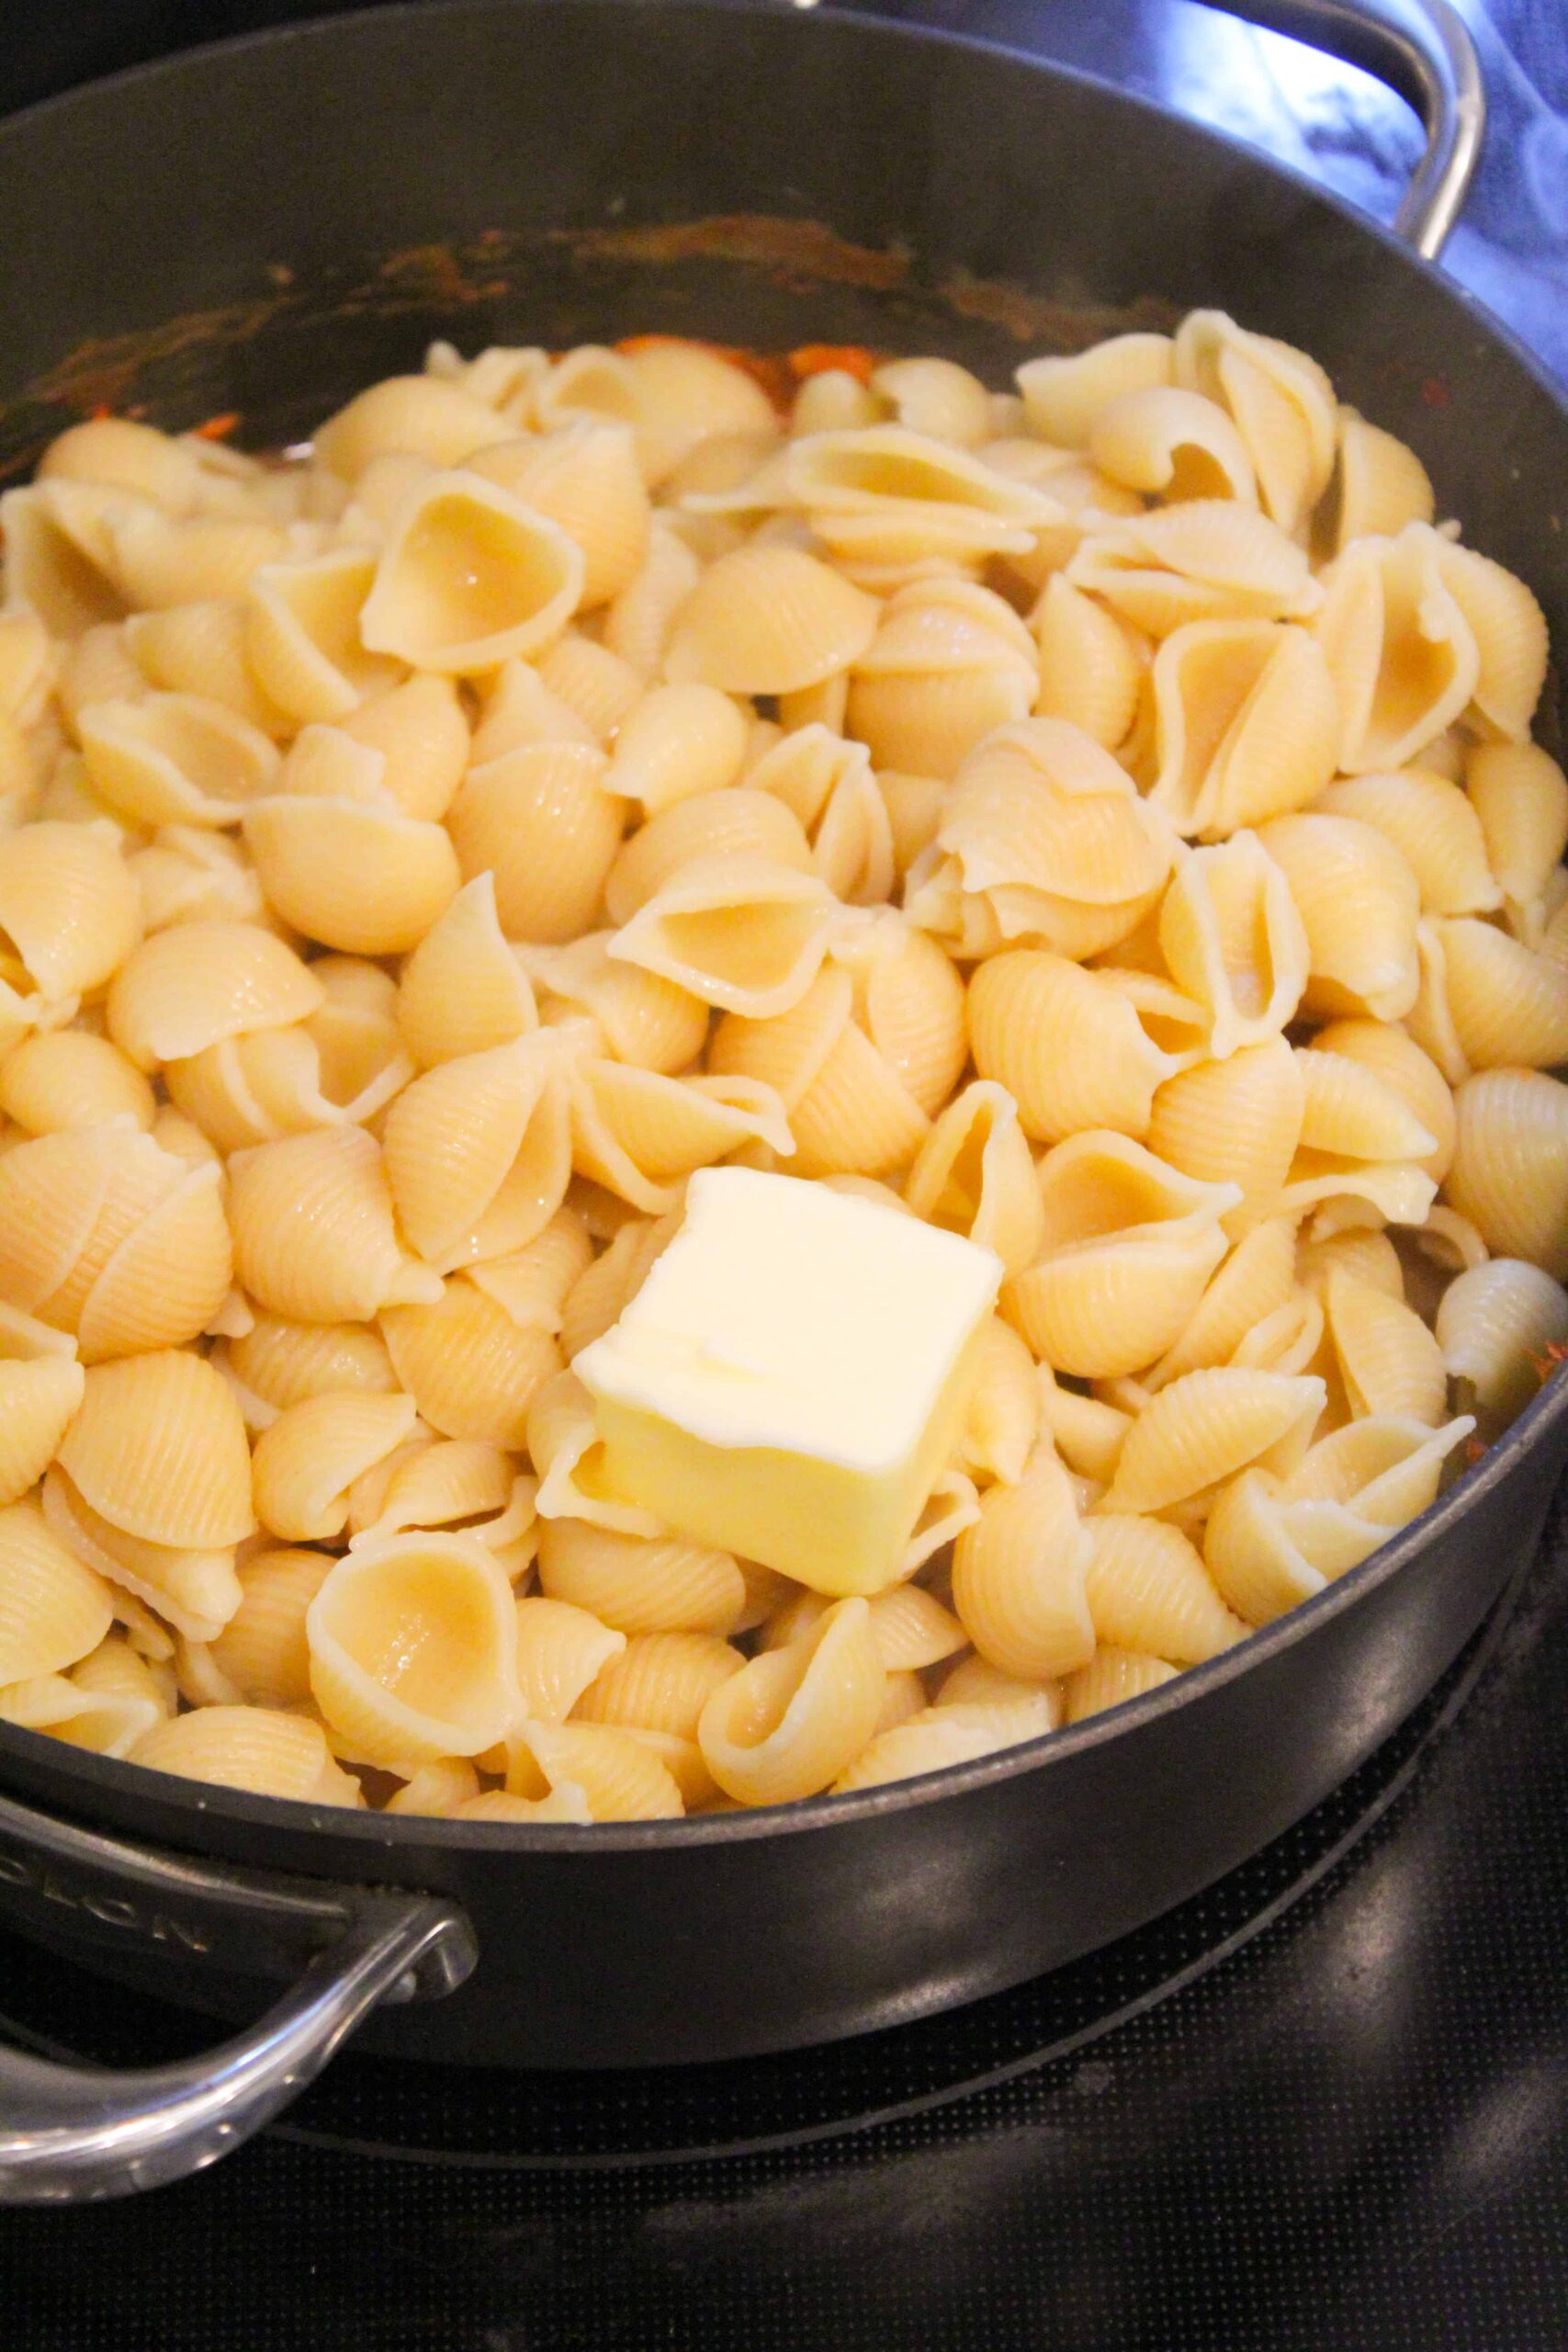 Butter being added to cooked shell pasta.